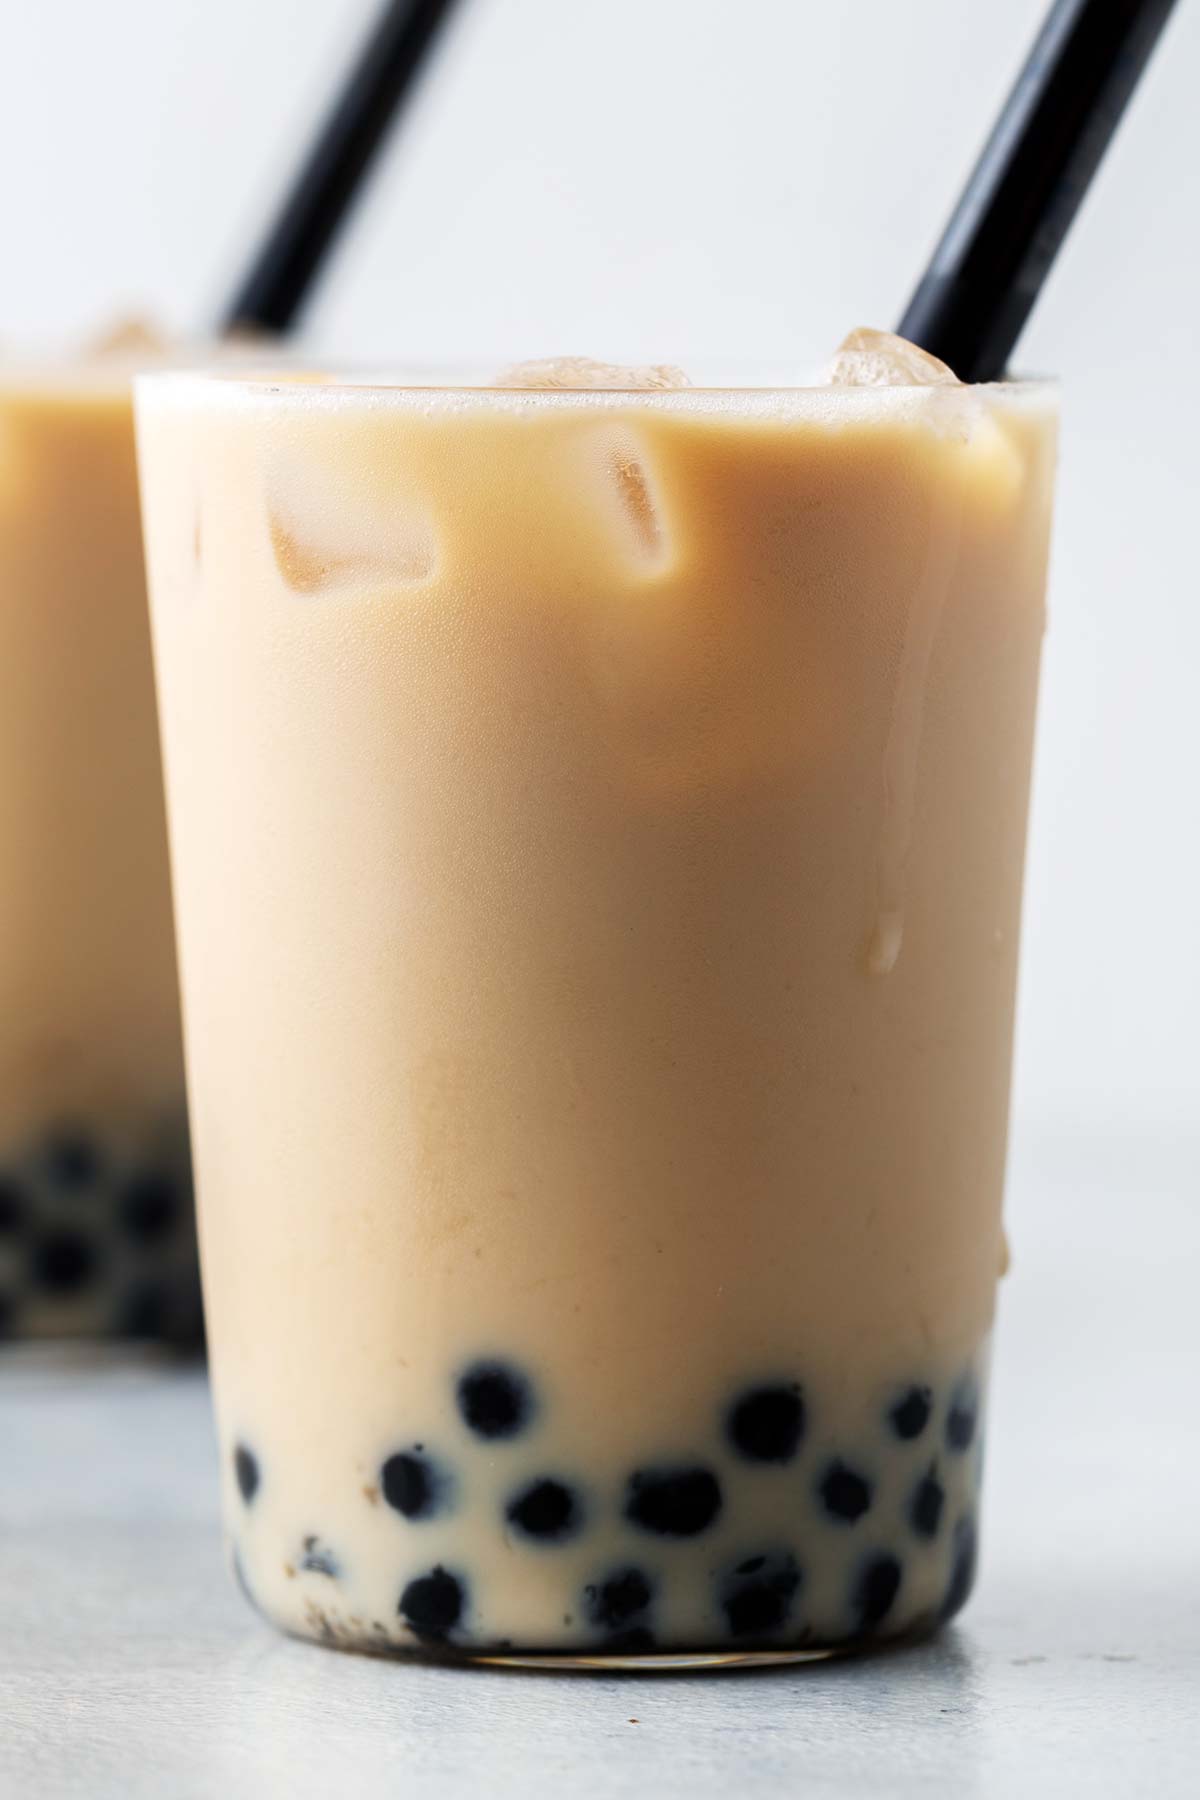 Rose Bubble Tea (Rose Milk Tea with Boba) fully assembled and mixed in a large clear glass.